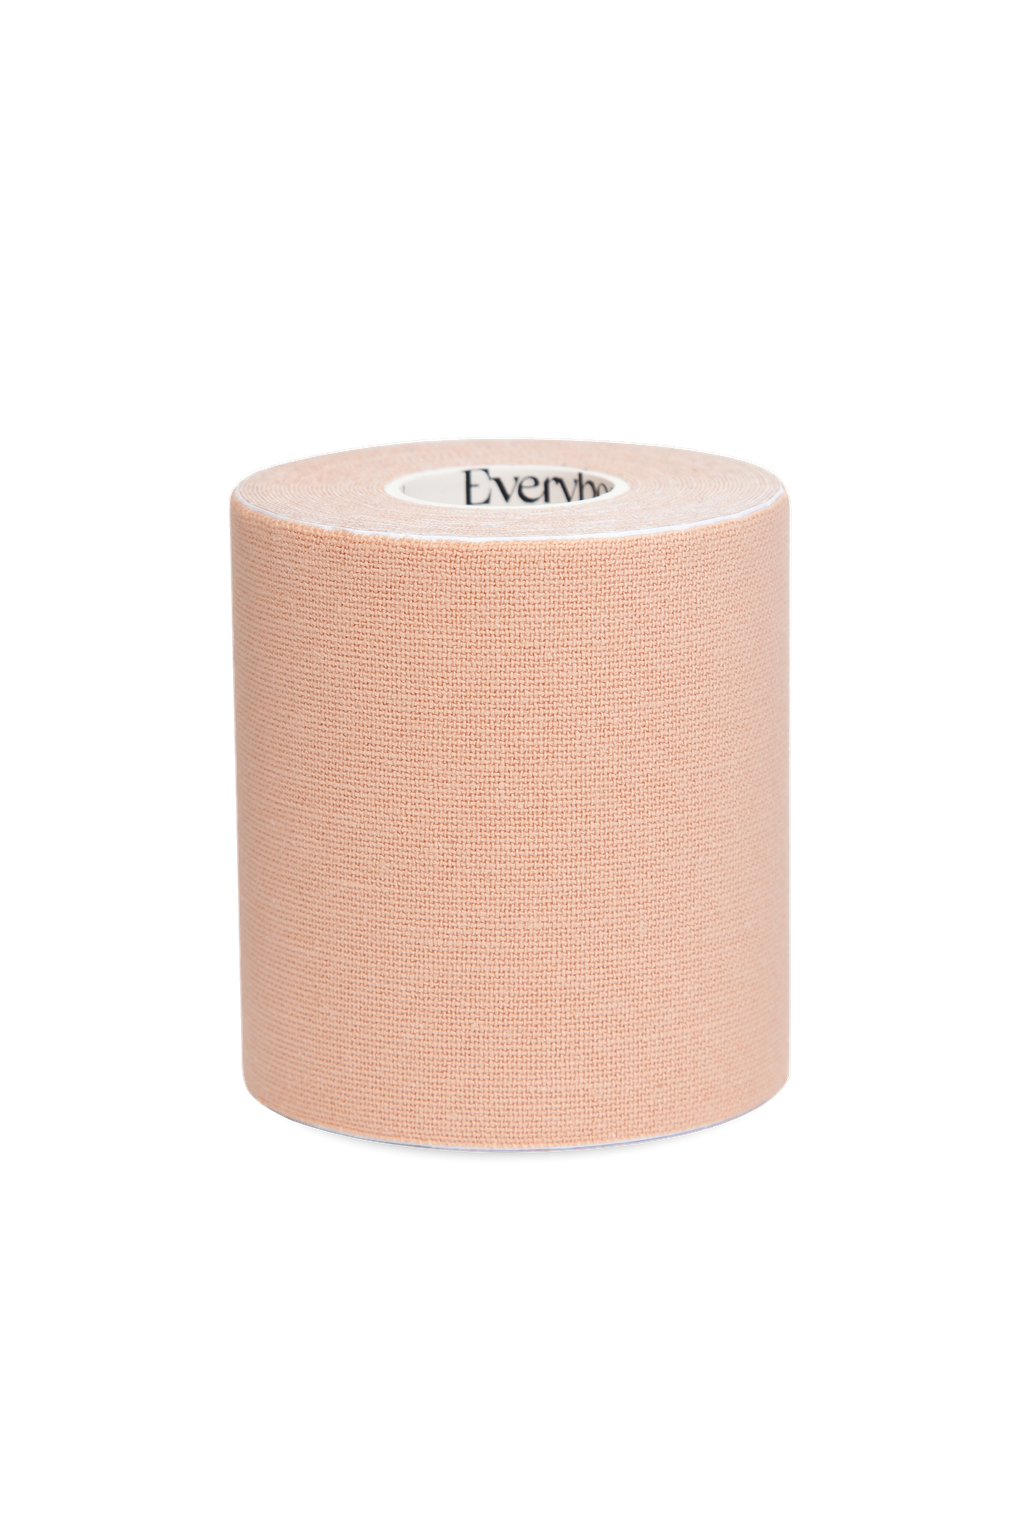 Tape For Larger Breasts, 5m Extra-long Roll Booby Tape , Adhesive